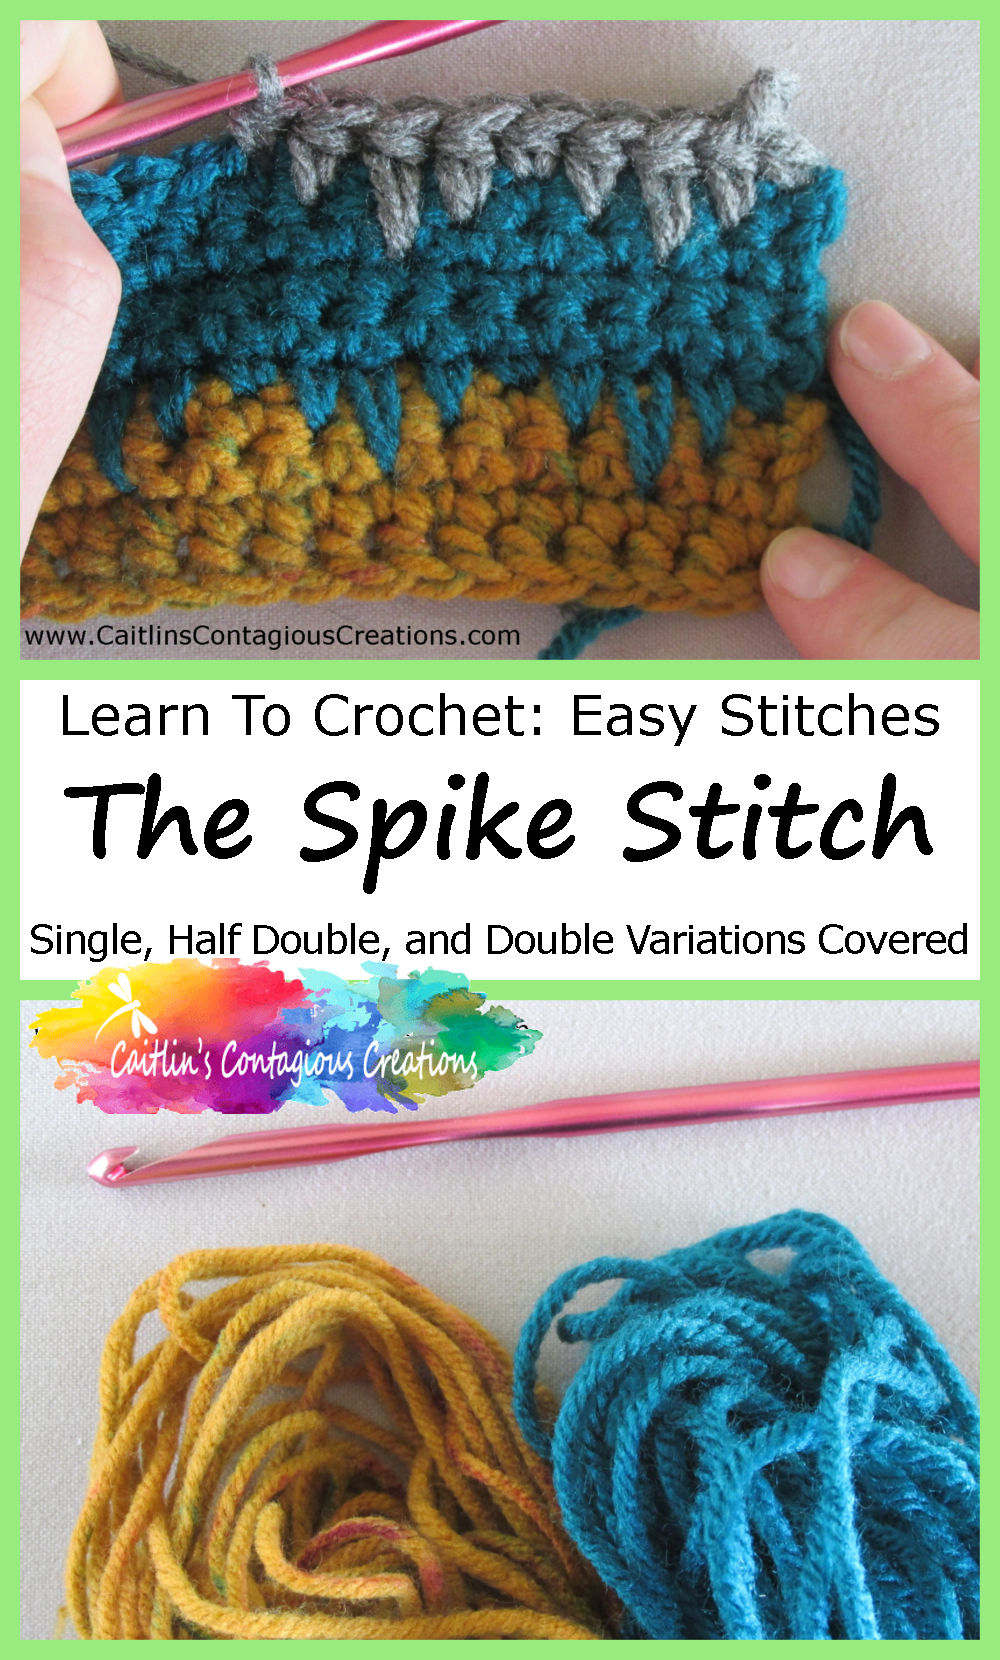 Learn to Crochet the Spike Stitch with this free crochet stitch tutorial from Caitlin's Contagious Creations. This easy to follow stitch guide is perfect for beginners who want to move beyond crochet basics. A photo tutorial with pictures and written instructions will have you working a fun new crochet stitch in no time! #LearnToCrochet #CrochetForBeginners #EasyCrochetStitches